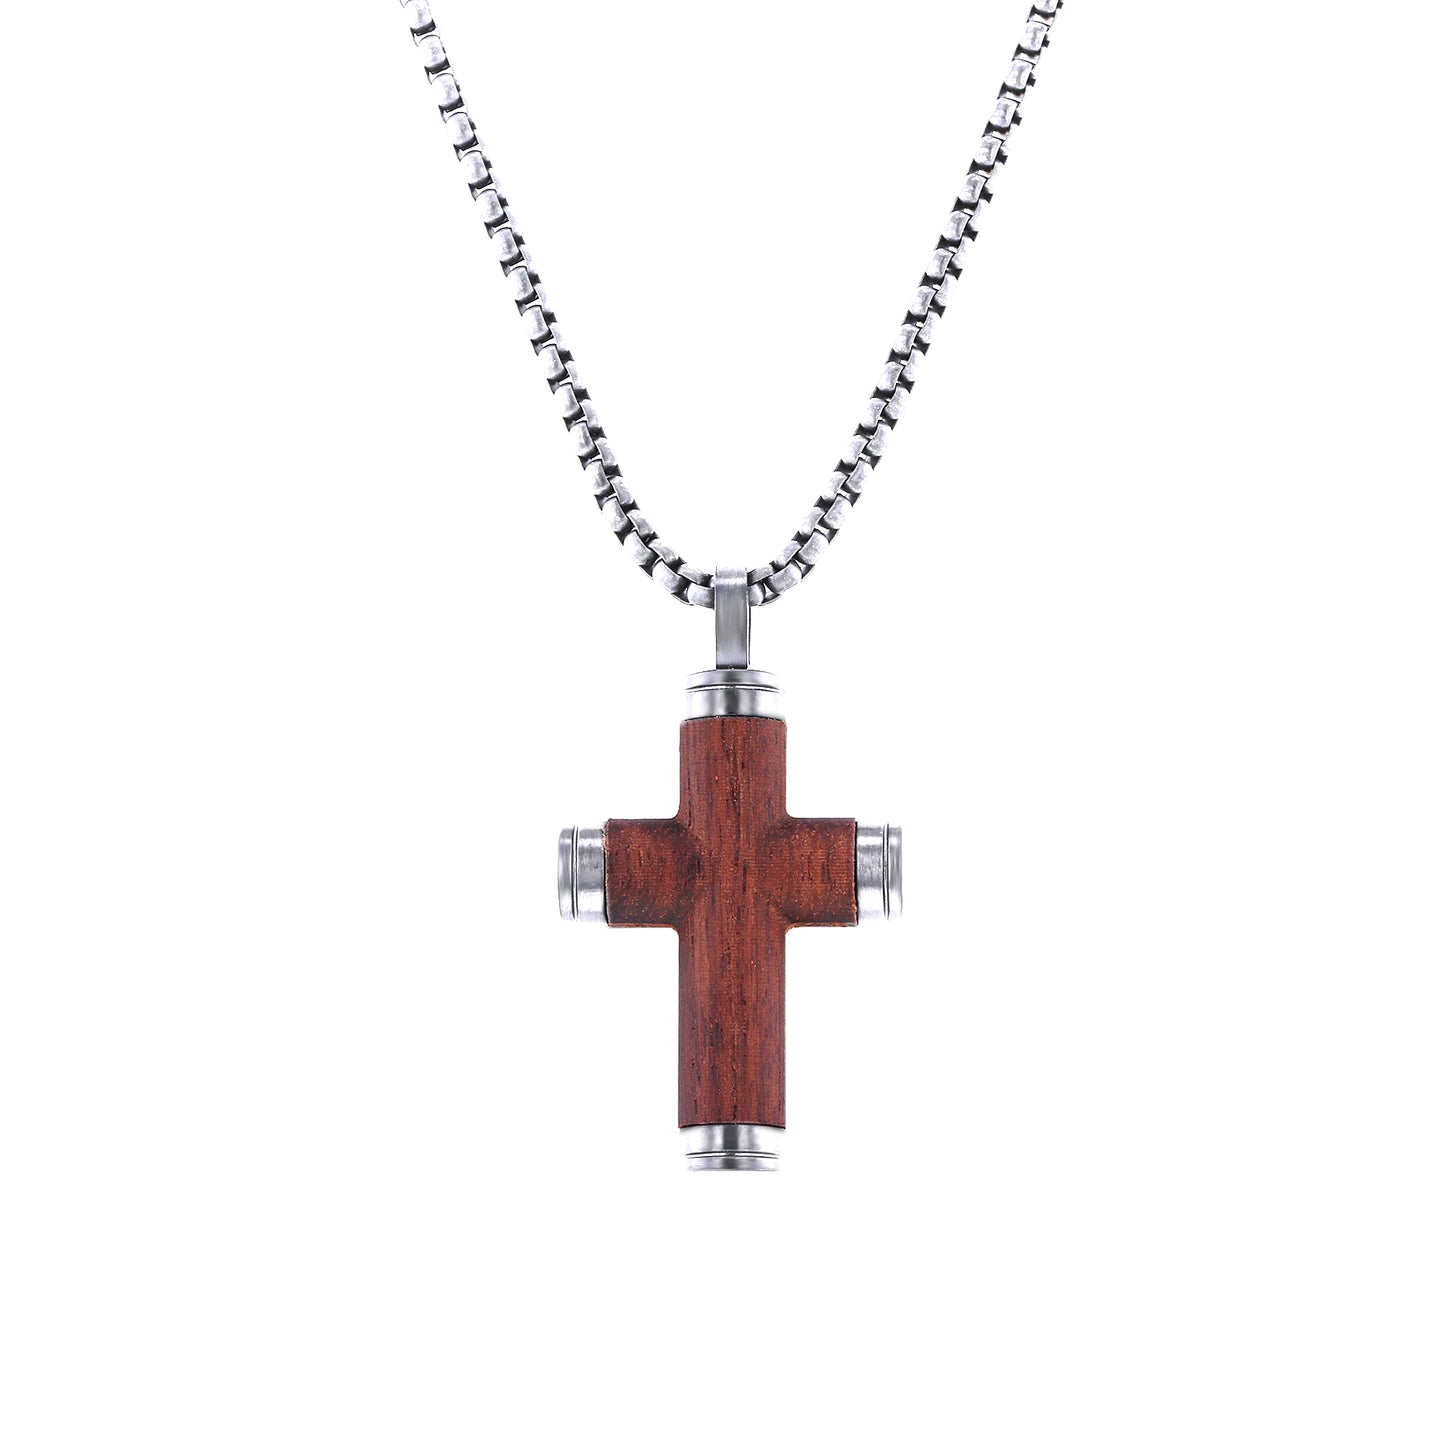 Calvary Stainless Steel and Wood Cross Necklace Black - Steven Singer Jewelers